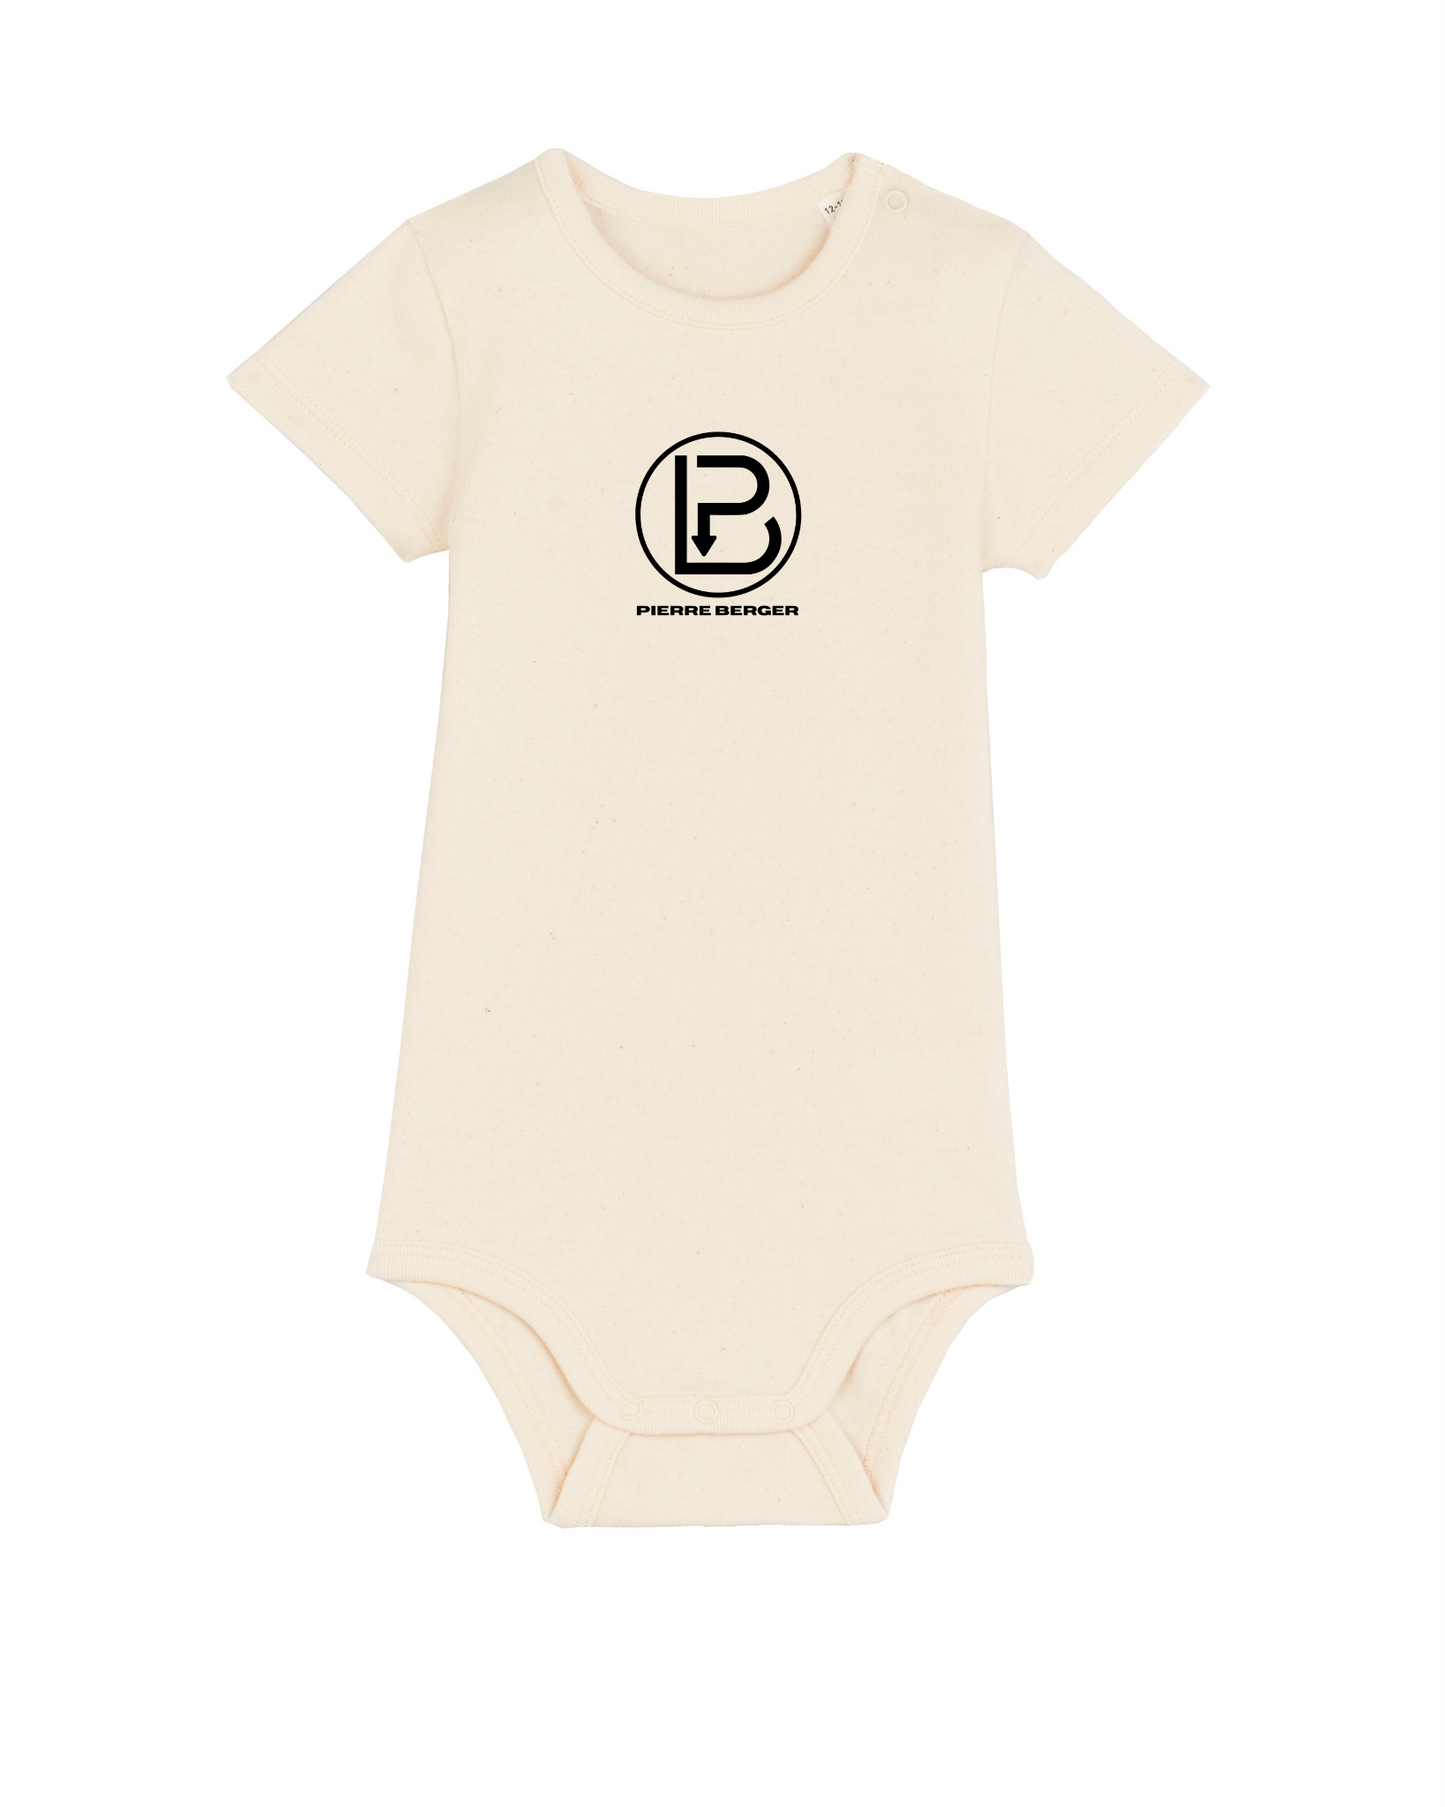 PIERRE BERGER - 100% organic cotton baby bodysuit embroidery